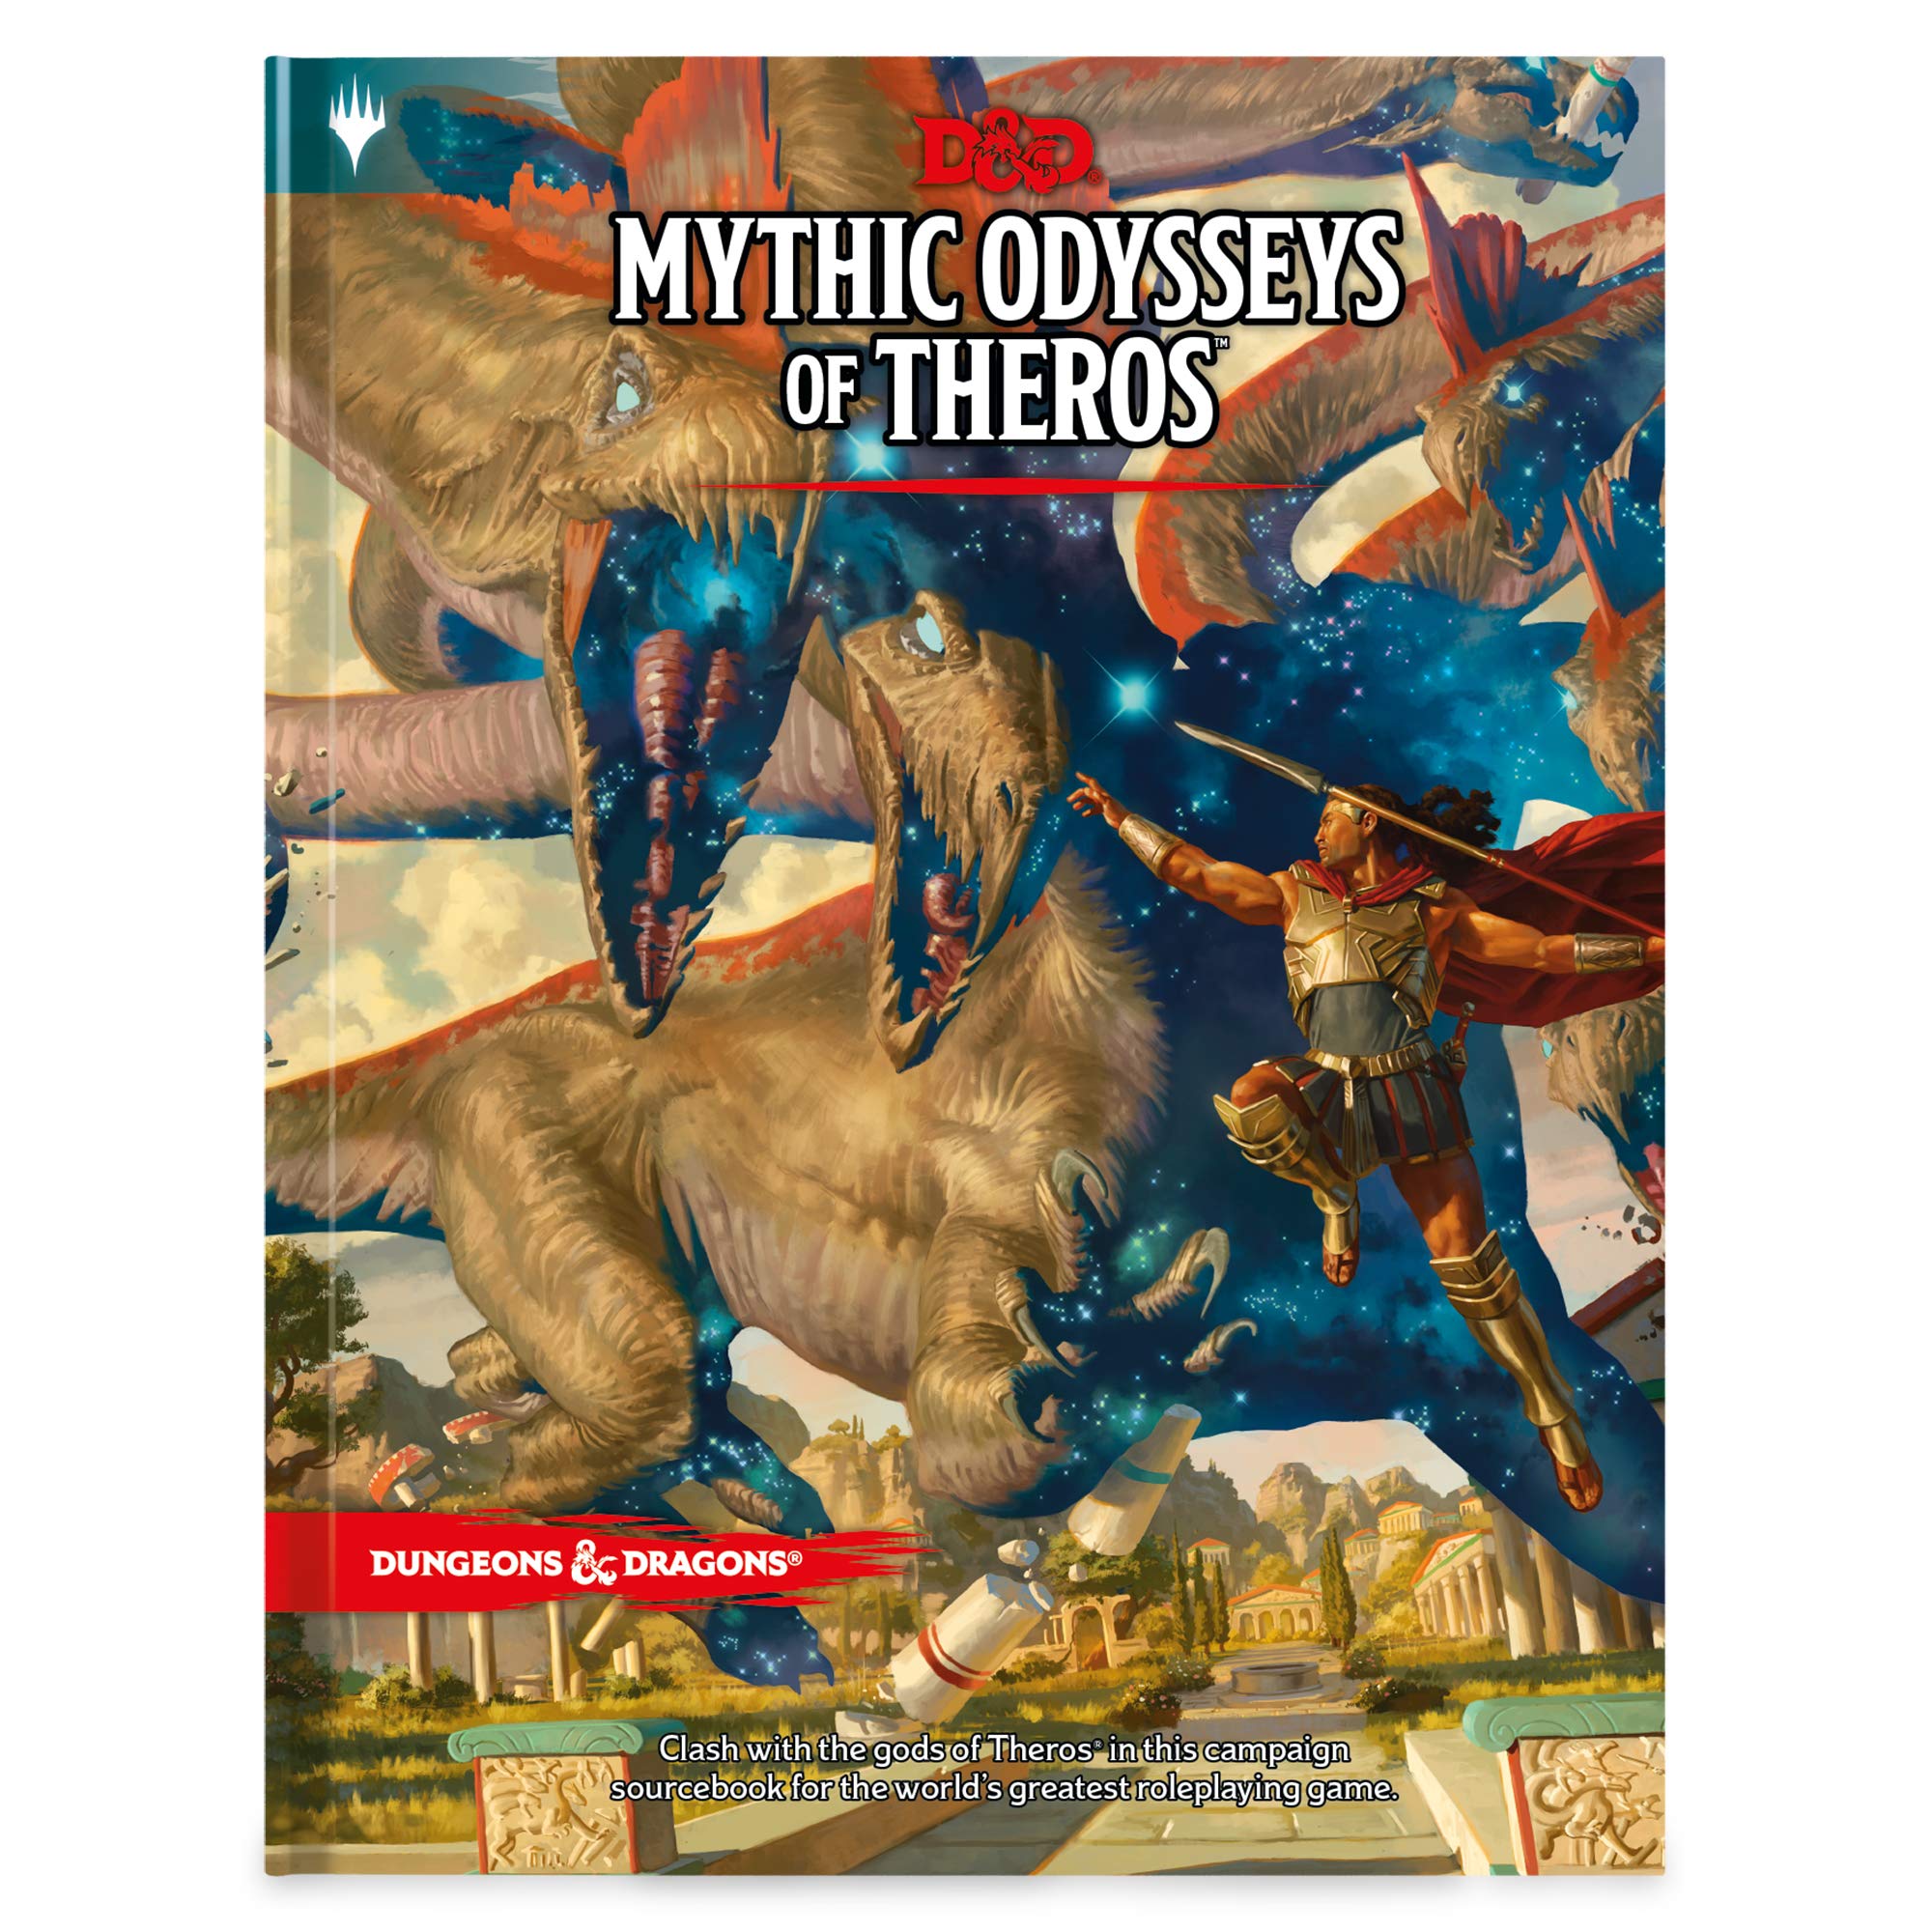 Dungeons & Dragons Rpg Mythic Odysseys of Theros Hardcover